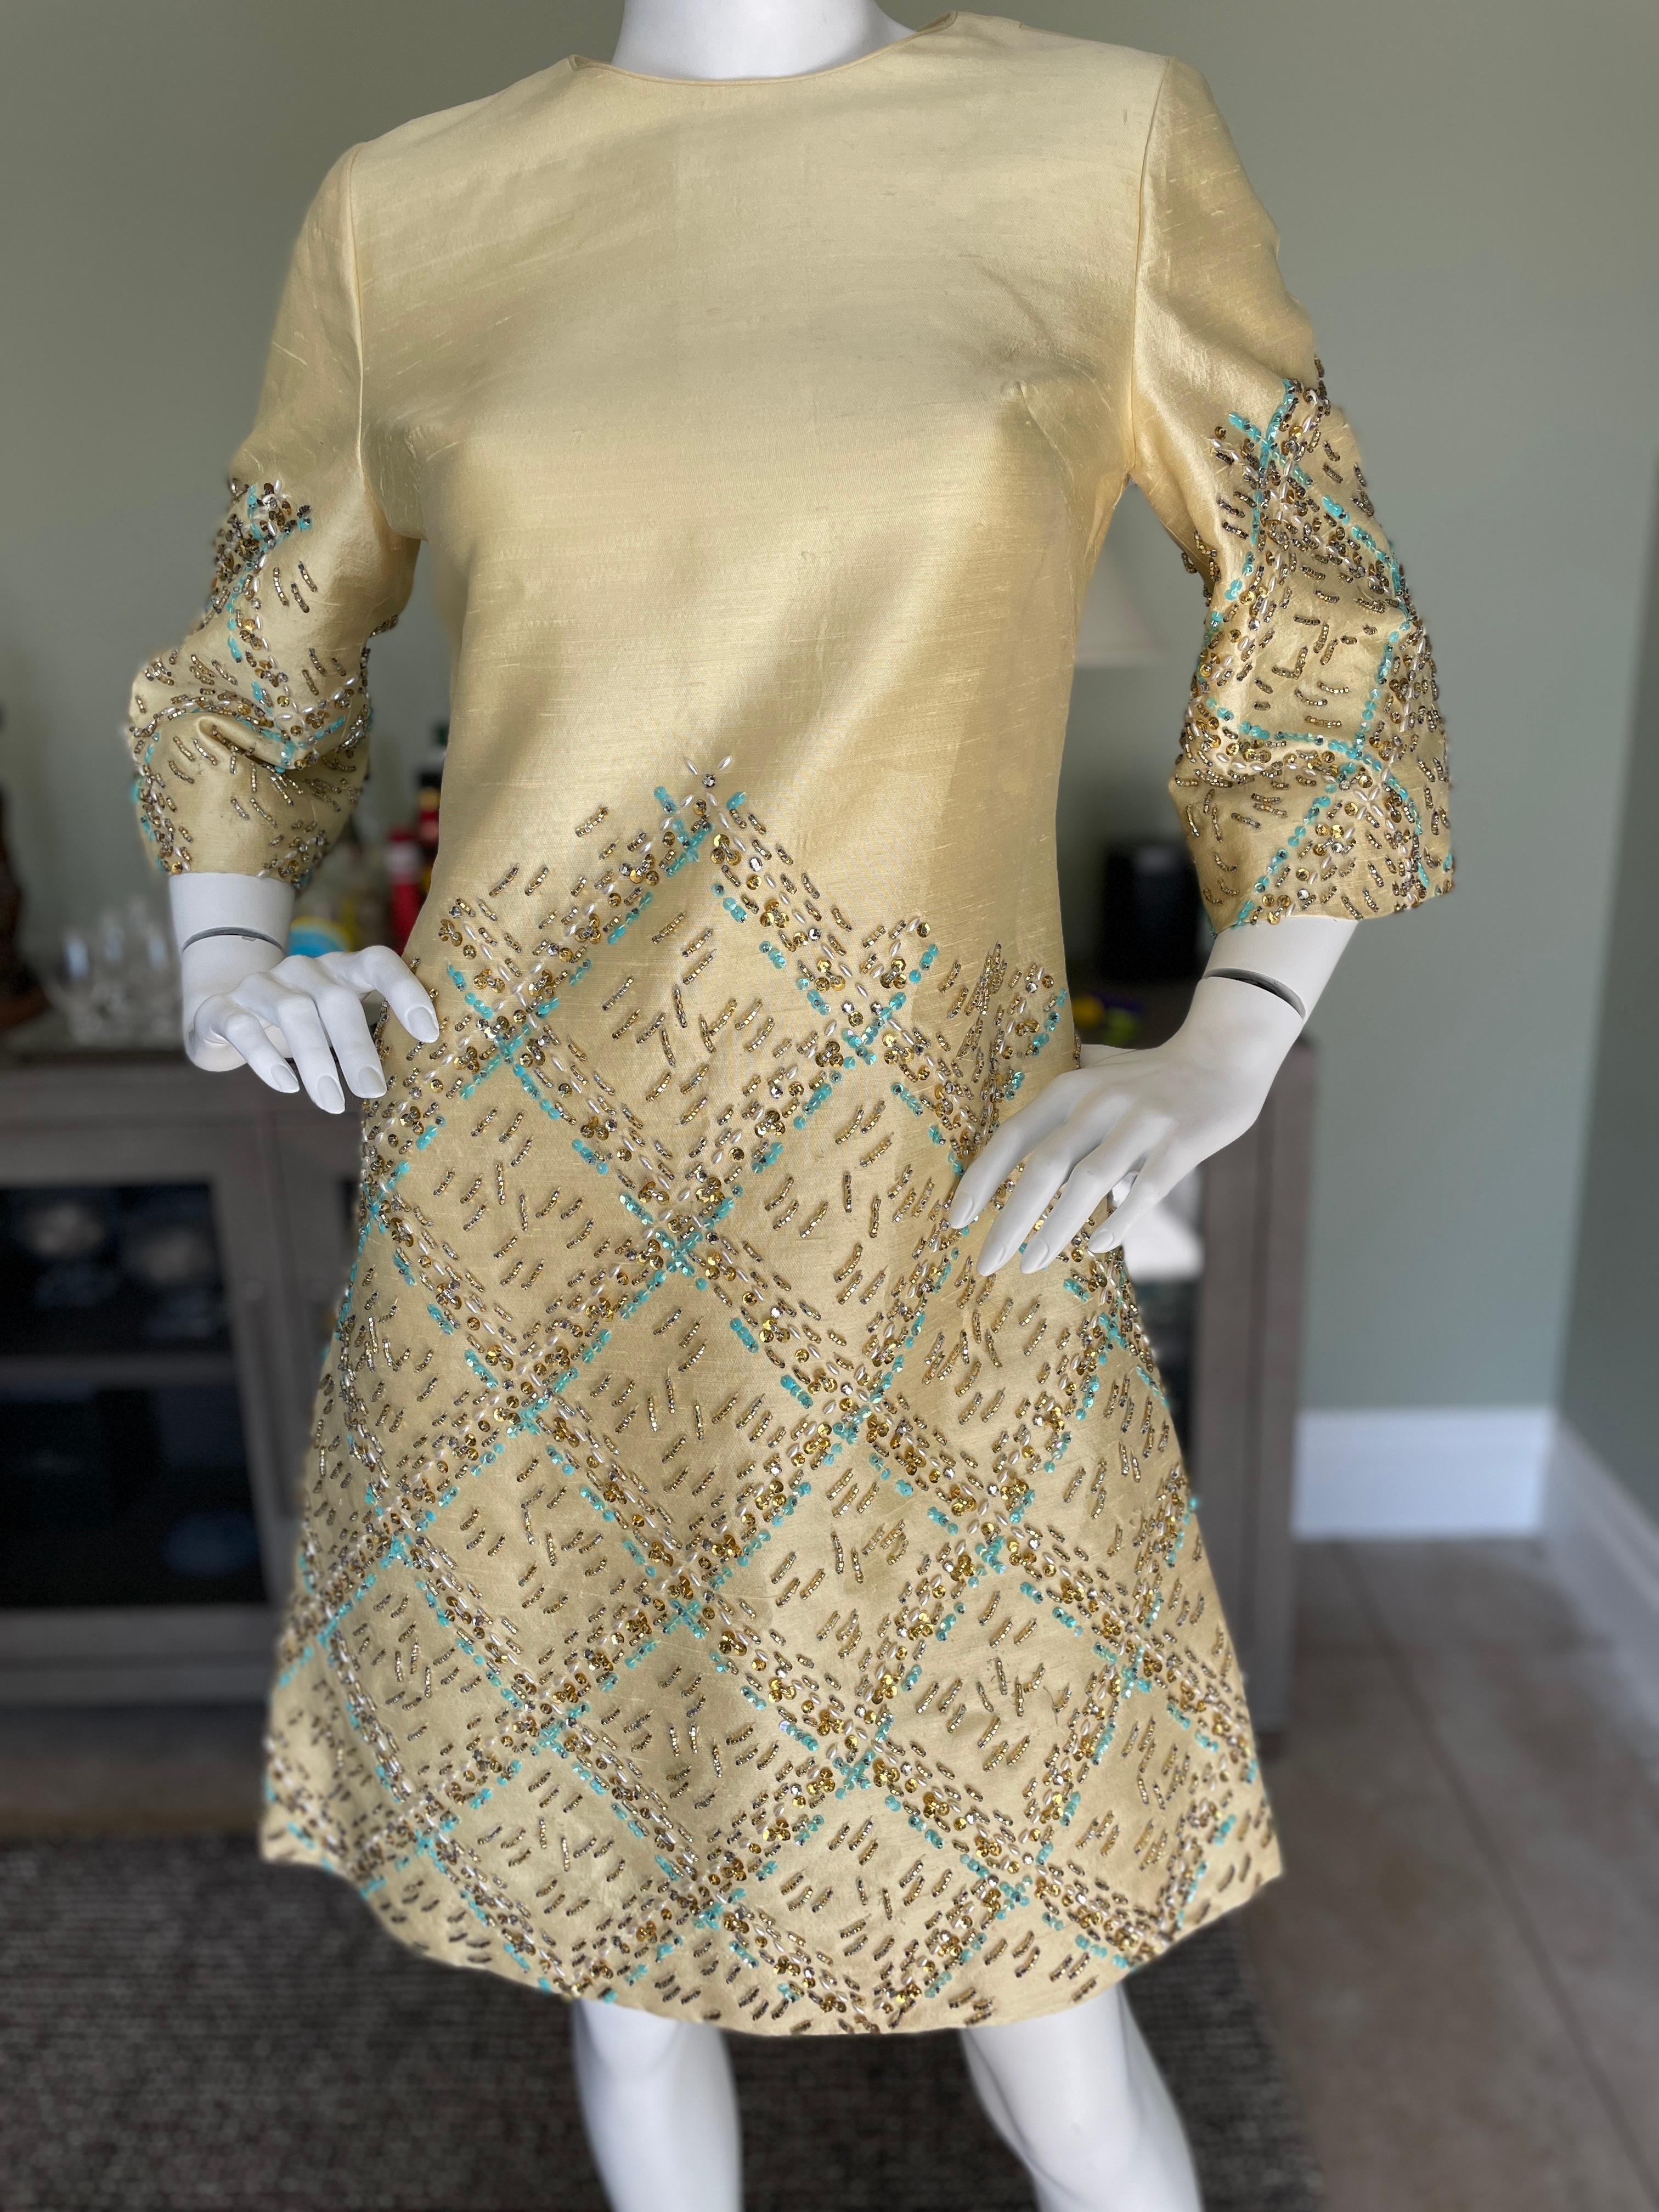 Vintage 1960's Dupioni Silk Cocktail Dress w Turquoise and Topaz Embellishments 
Beautiful bead work on the dupioni silk.
This is so pretty, but runs a bit small for it's size, so please refer to measurements.
Size 10, more like a 6 today
Bust